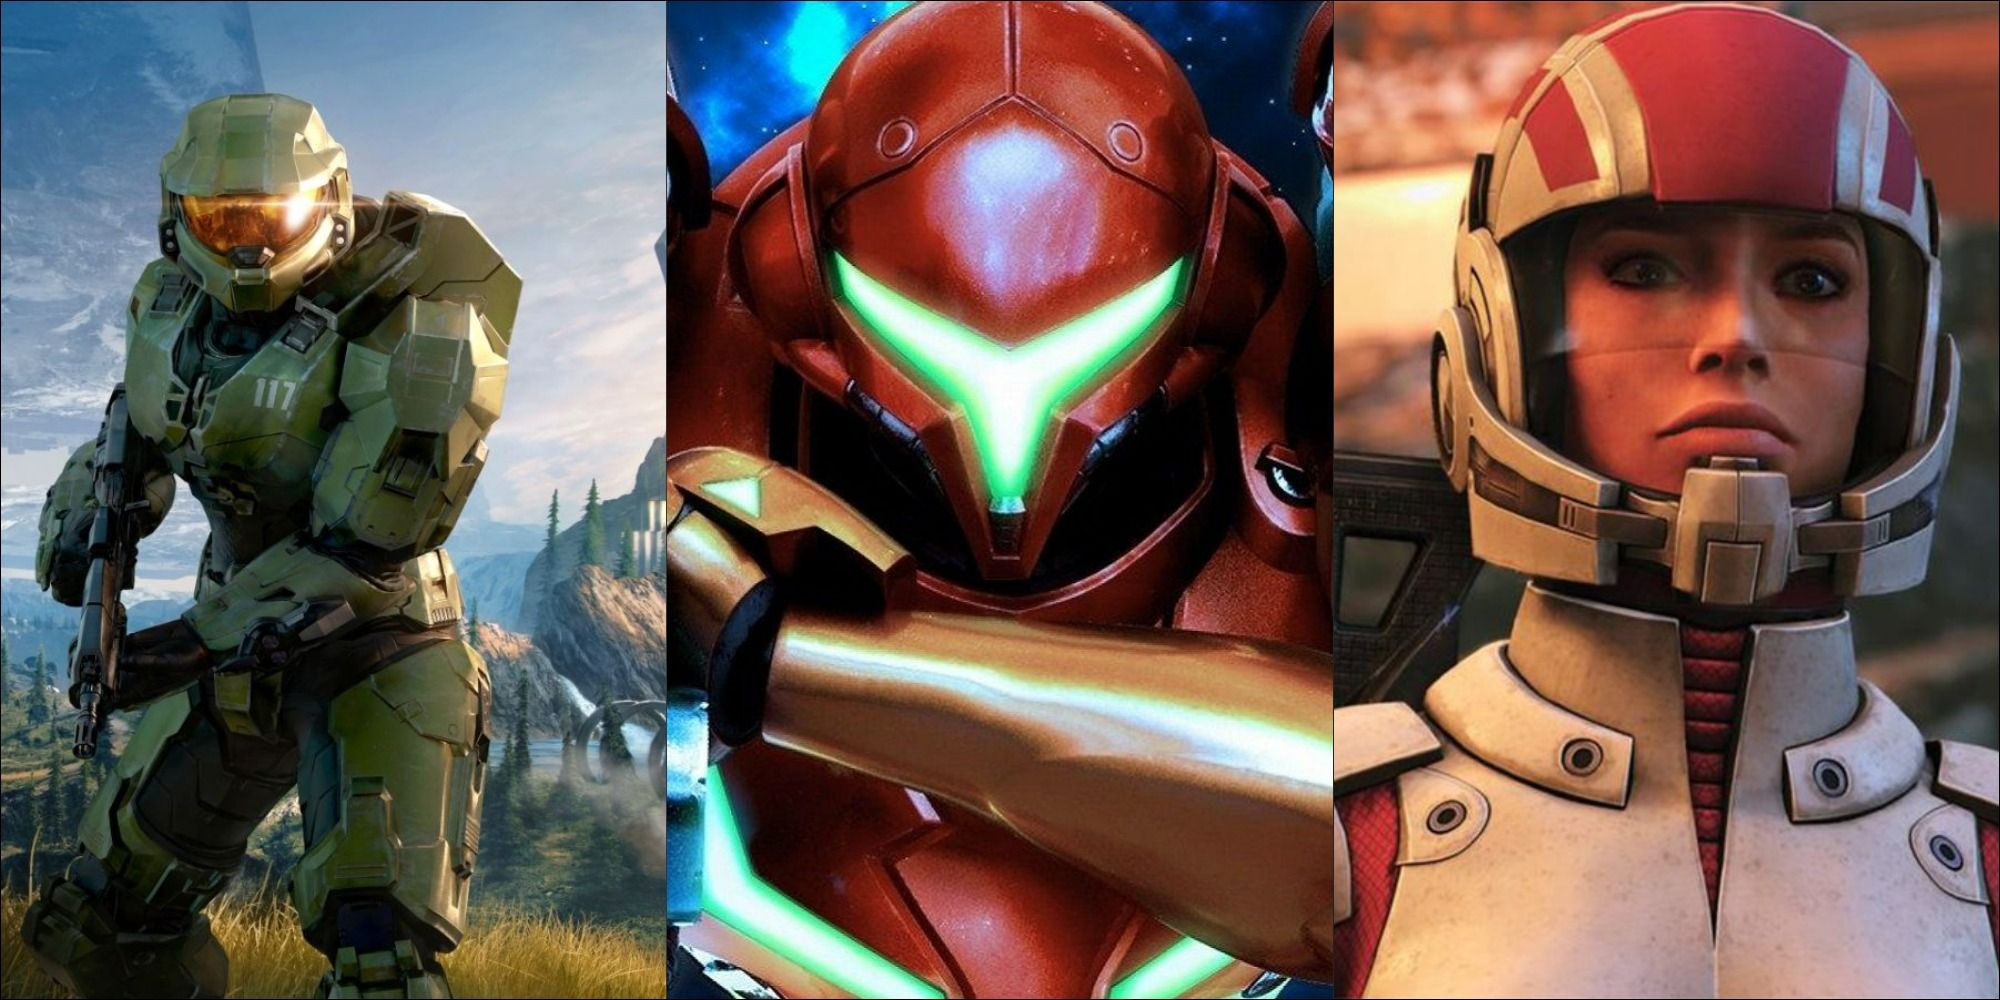 Master Chief, Samus Aran, and Ashley Williams, space marines from various games